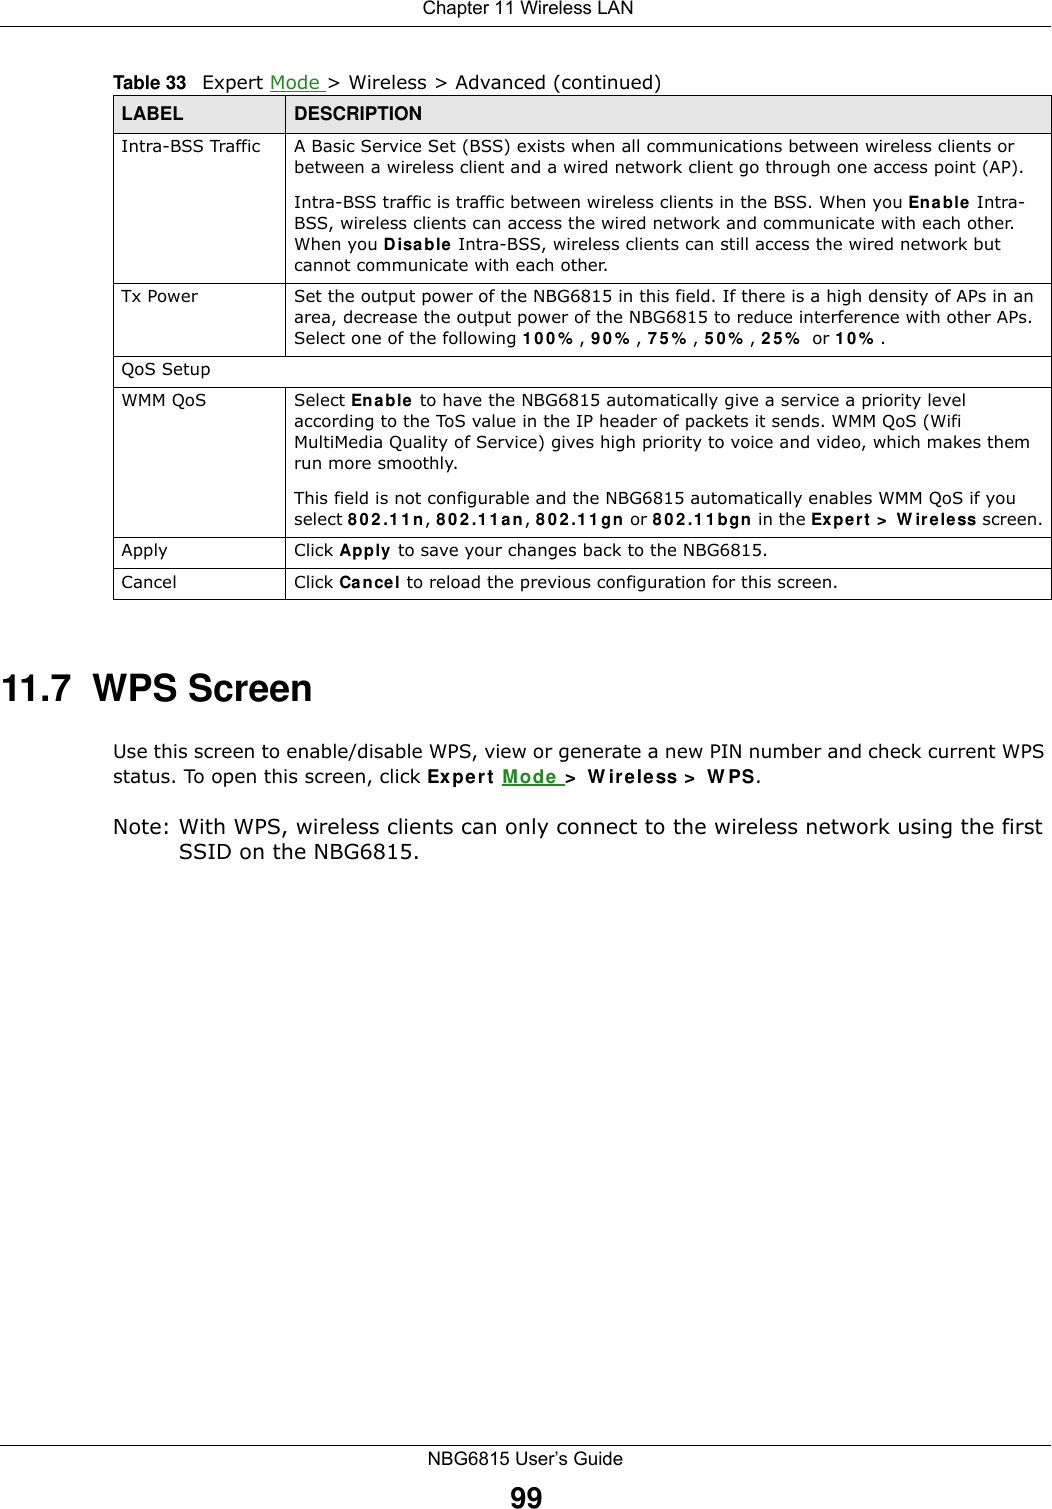  Chapter 11 Wireless LANNBG6815 User’s Guide9911.7  WPS ScreenUse this screen to enable/disable WPS, view or generate a new PIN number and check current WPS status. To open this screen, click Expert Mode &gt; Wireless &gt; WPS.Note: With WPS, wireless clients can only connect to the wireless network using the first SSID on the NBG6815.Intra-BSS Traffic A Basic Service Set (BSS) exists when all communications between wireless clients or between a wireless client and a wired network client go through one access point (AP). Intra-BSS traffic is traffic between wireless clients in the BSS. When you Enable Intra-BSS, wireless clients can access the wired network and communicate with each other. When you Disable Intra-BSS, wireless clients can still access the wired network but cannot communicate with each other.Tx Power Set the output power of the NBG6815 in this field. If there is a high density of APs in an area, decrease the output power of the NBG6815 to reduce interference with other APs. Select one of the following 100%, 90%, 75%, 50%, 25% or 10%. QoS SetupWMM QoS Select Enable to have the NBG6815 automatically give a service a priority level according to the ToS value in the IP header of packets it sends. WMM QoS (Wifi MultiMedia Quality of Service) gives high priority to voice and video, which makes them run more smoothly.This field is not configurable and the NBG6815 automatically enables WMM QoS if you select 802.11n, 802.11an, 802.11gn or 802.11bgn in the Expert &gt; Wireless screen.Apply Click Apply to save your changes back to the NBG6815.Cancel Click Cancel to reload the previous configuration for this screen.Table 33   Expert Mode &gt; Wireless &gt; Advanced (continued)LABEL DESCRIPTION